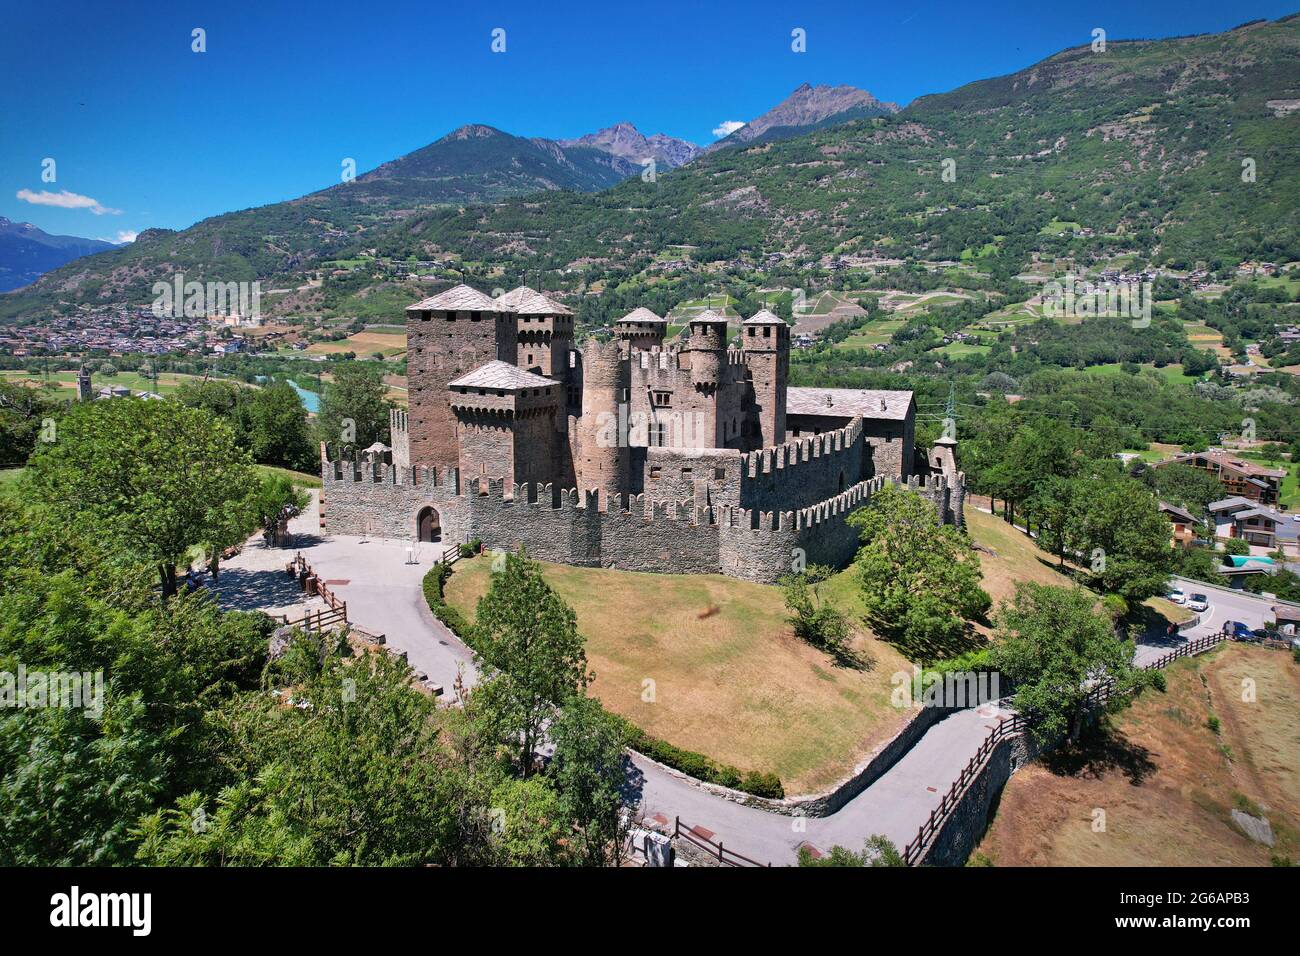 Aerial view of Fenis Castle in Aosta Valley. Italy Stock Photo